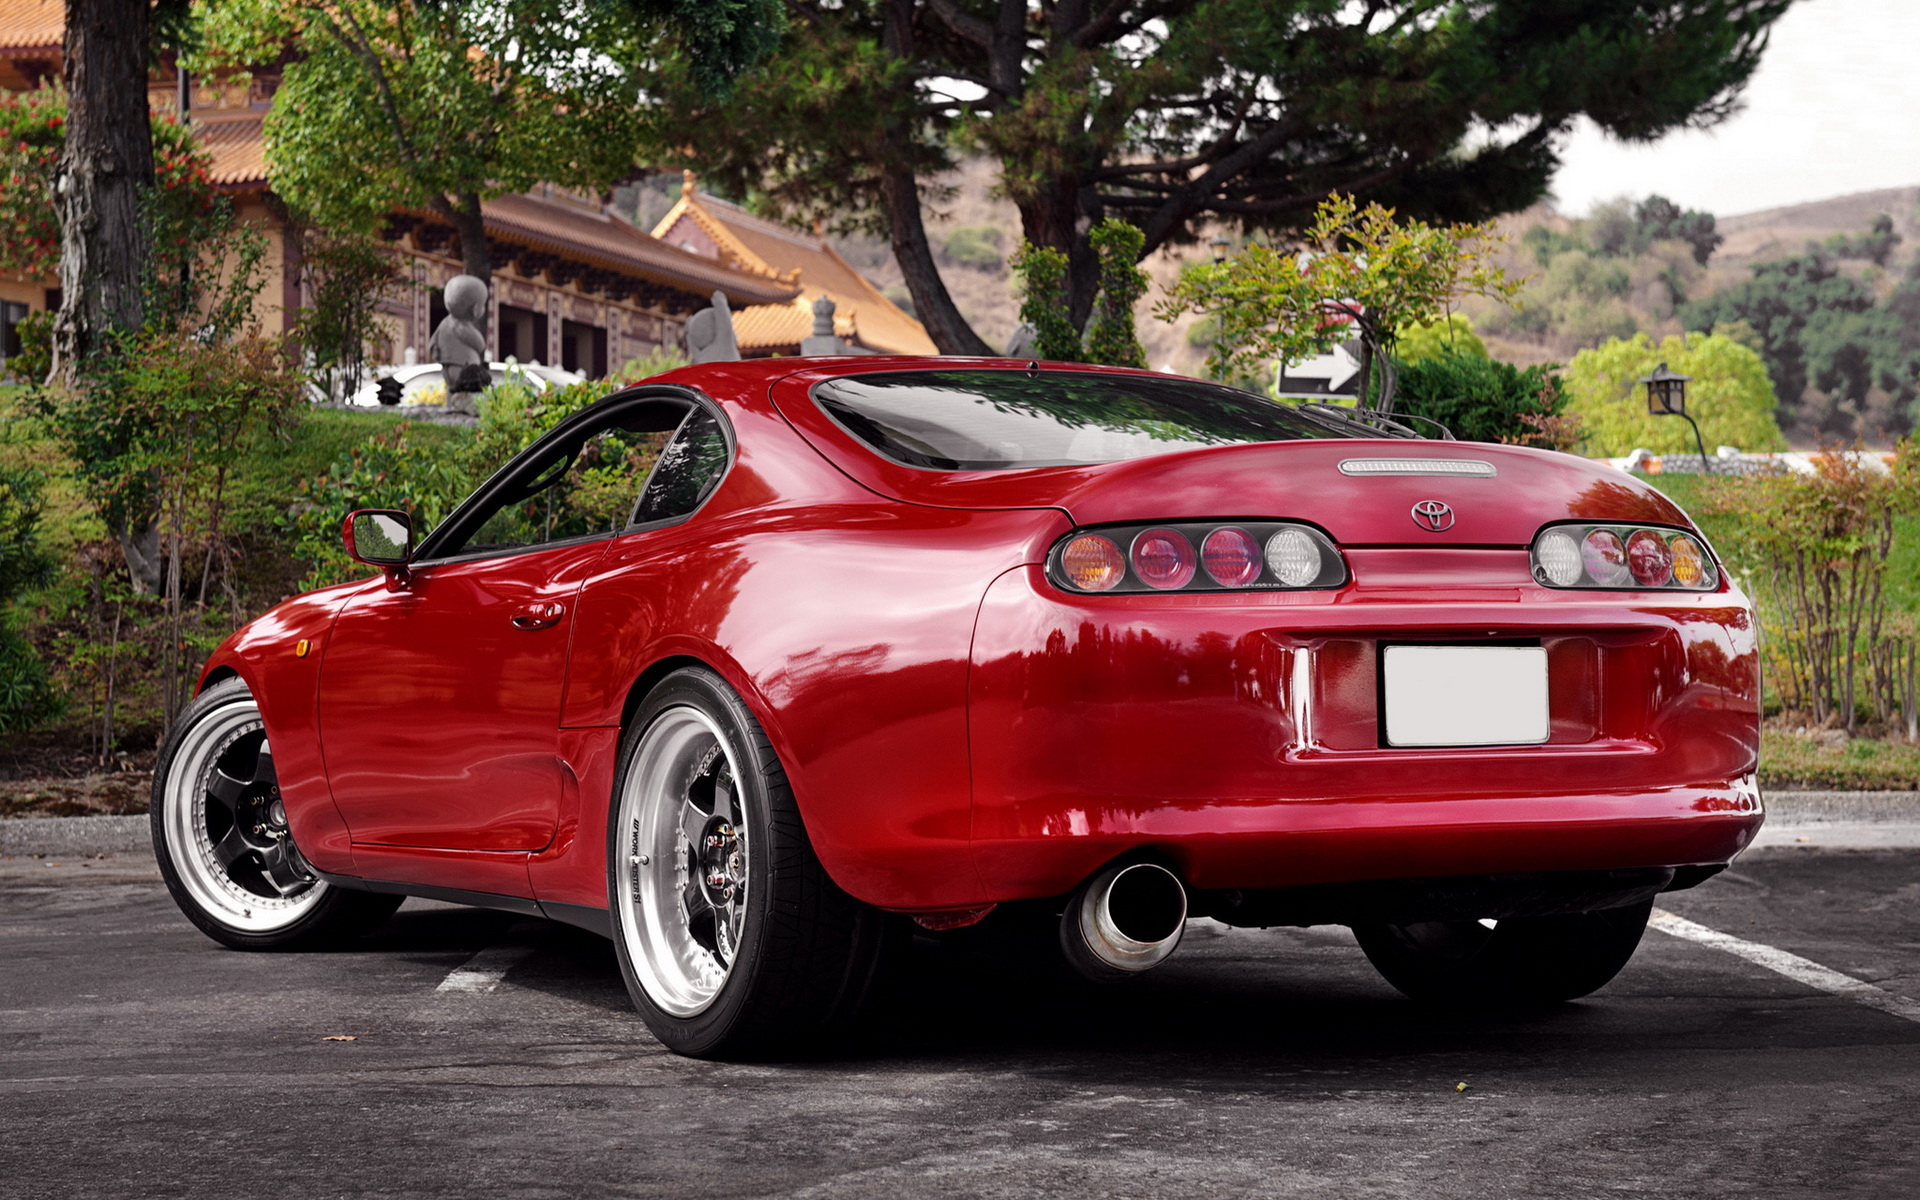 Toyota Supra wallpapers and images   wallpapers pictures photos